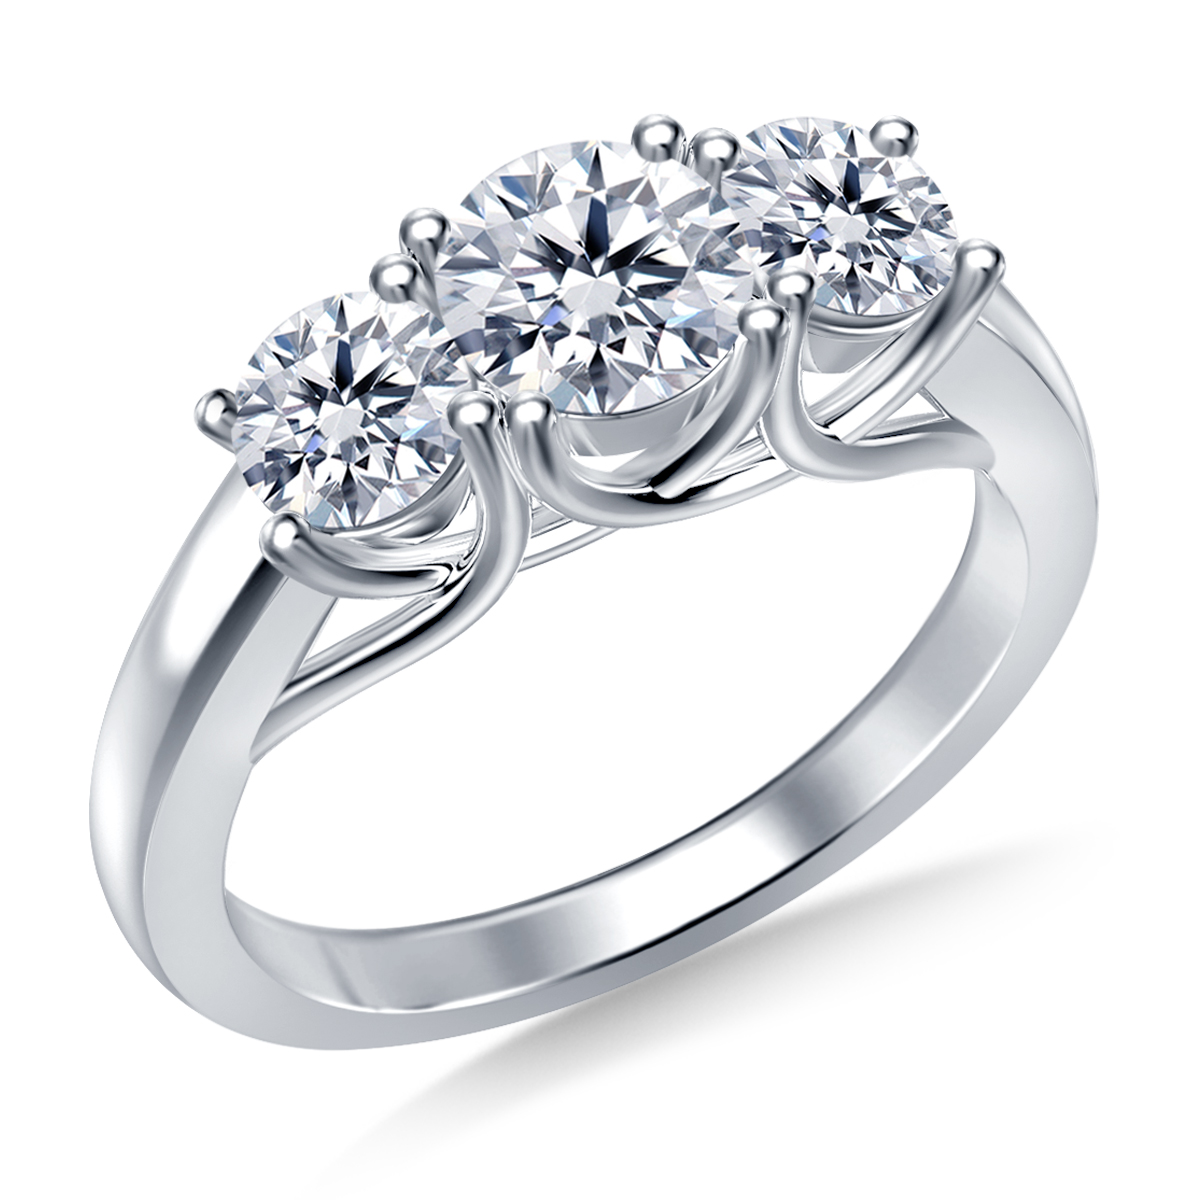 B2C Jewels Blog: How To Choose A Royal Engagement Ring